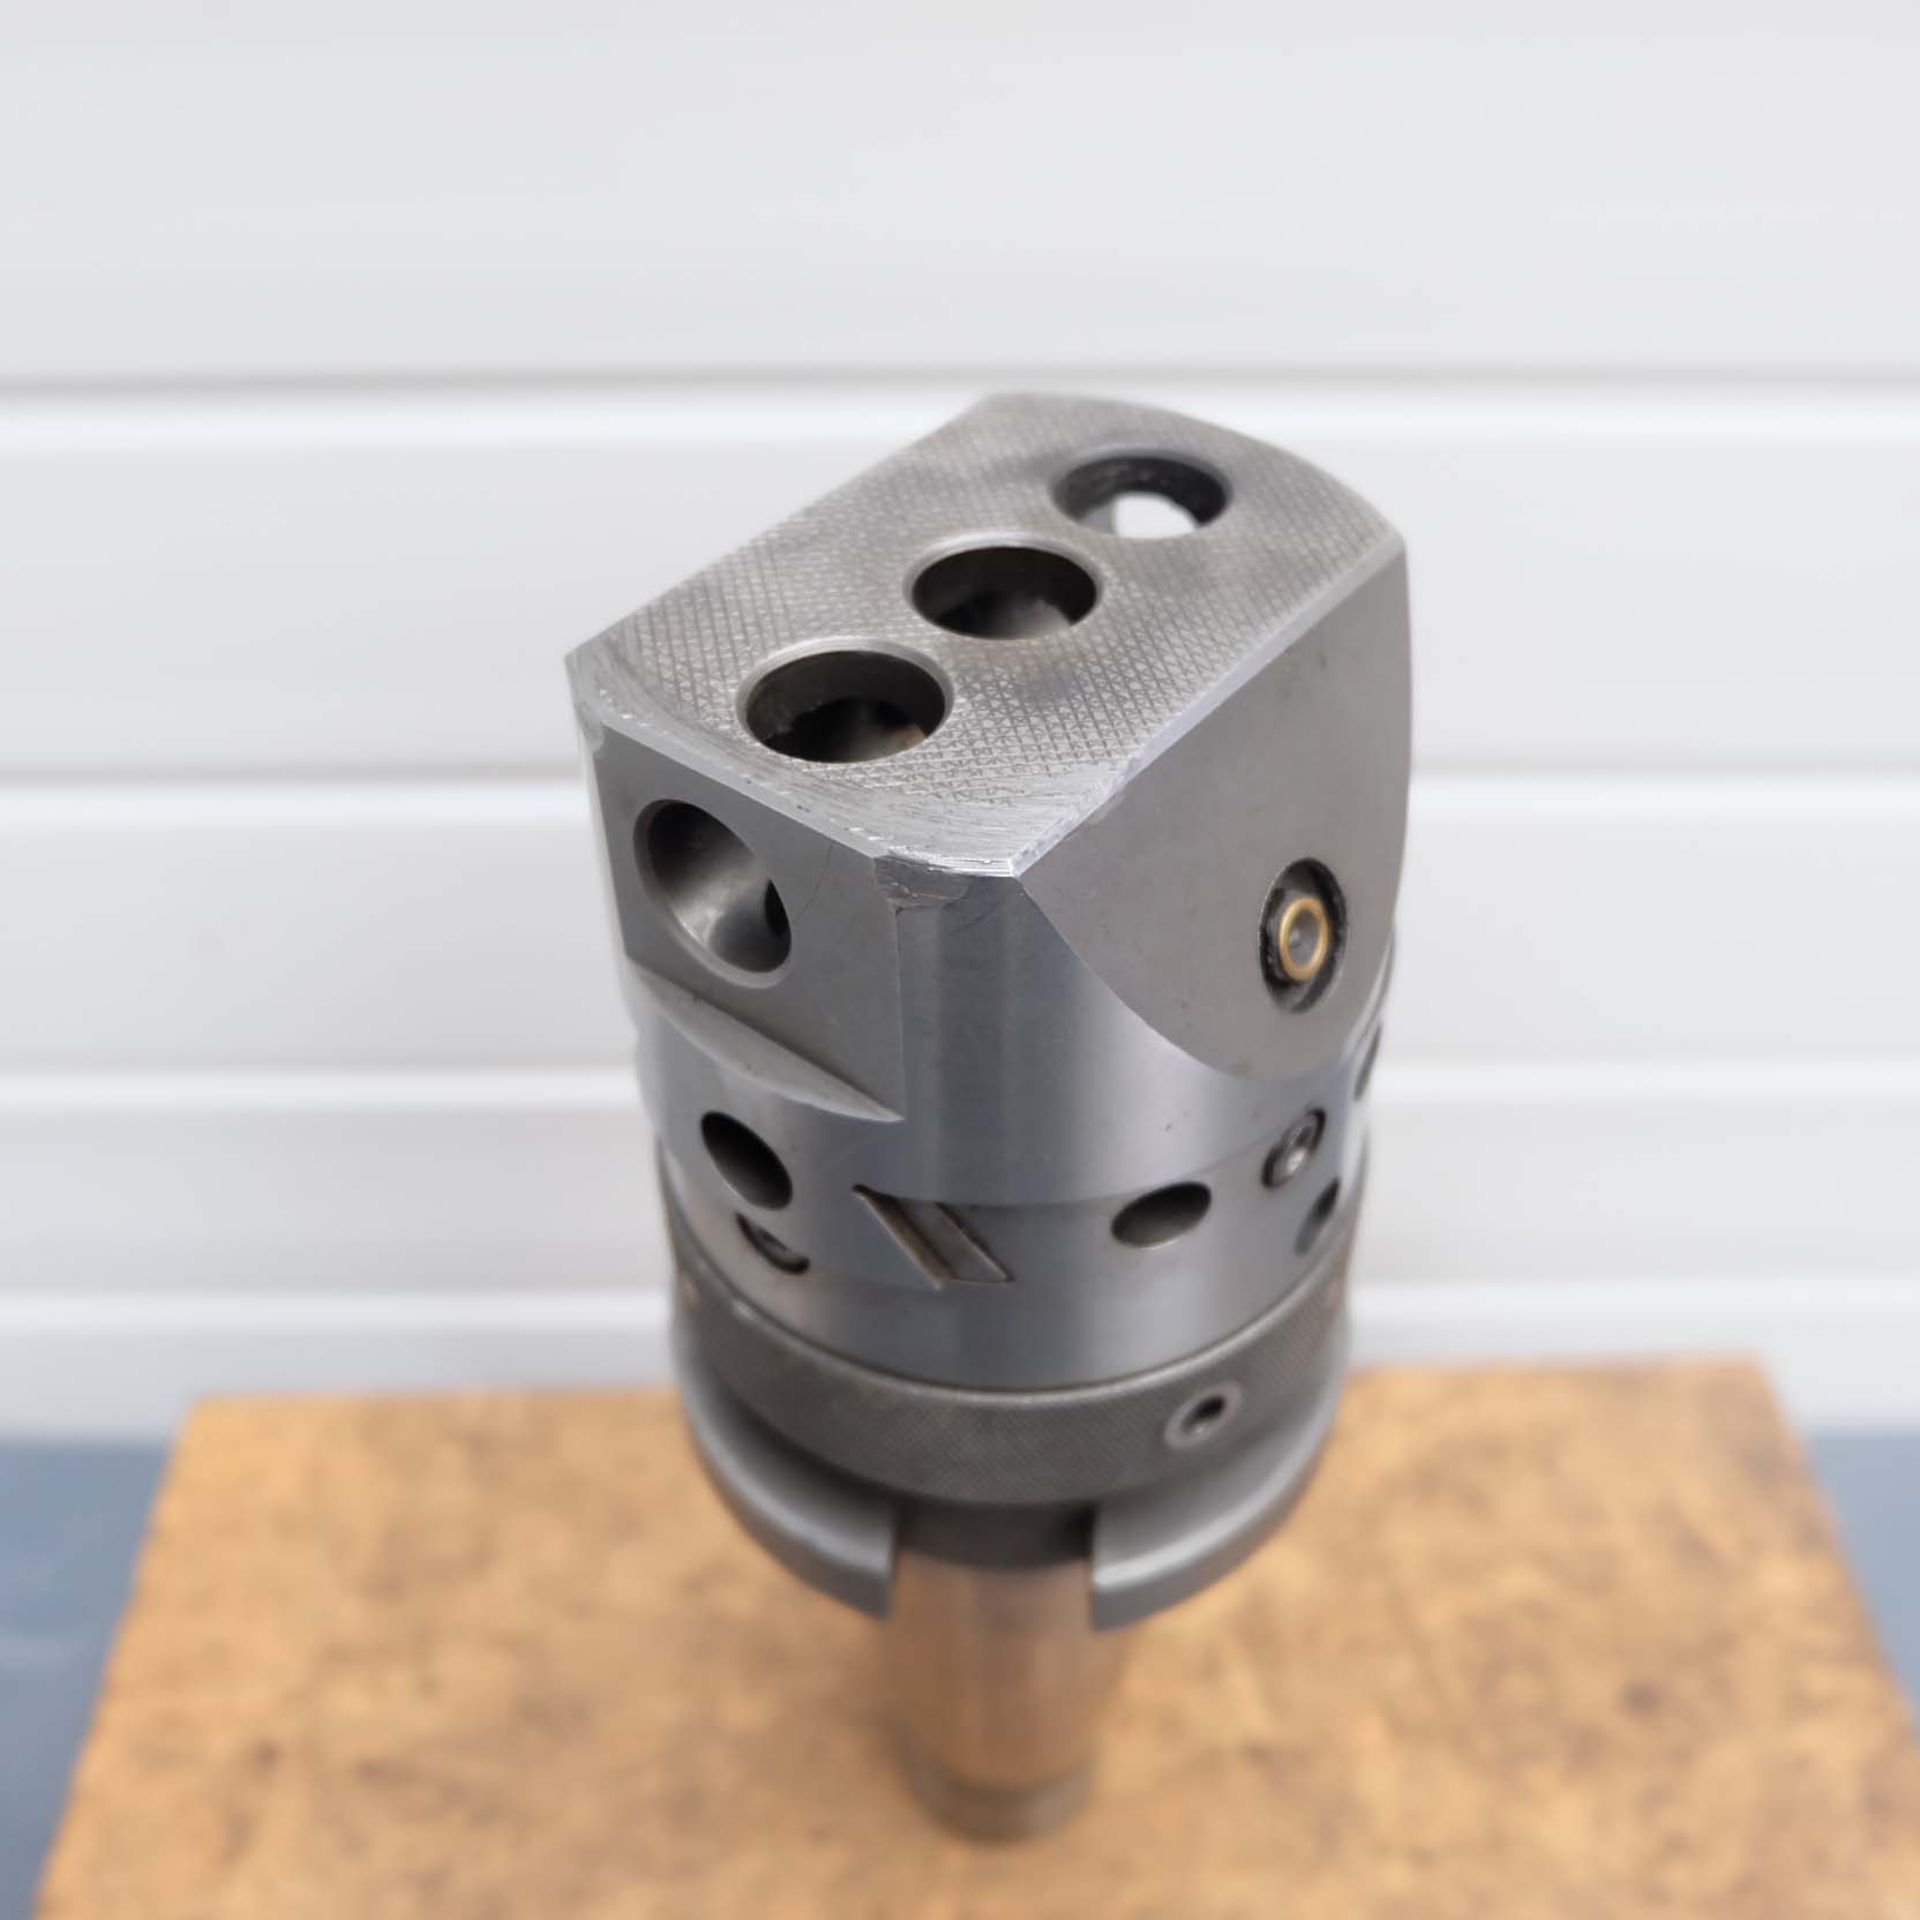 Boring & Facing Head. Head Size 3 1/2" Diameter. Spindle Taper 50 ISO x 1" Whit. Boring Bar Holes 3/ - Image 5 of 7